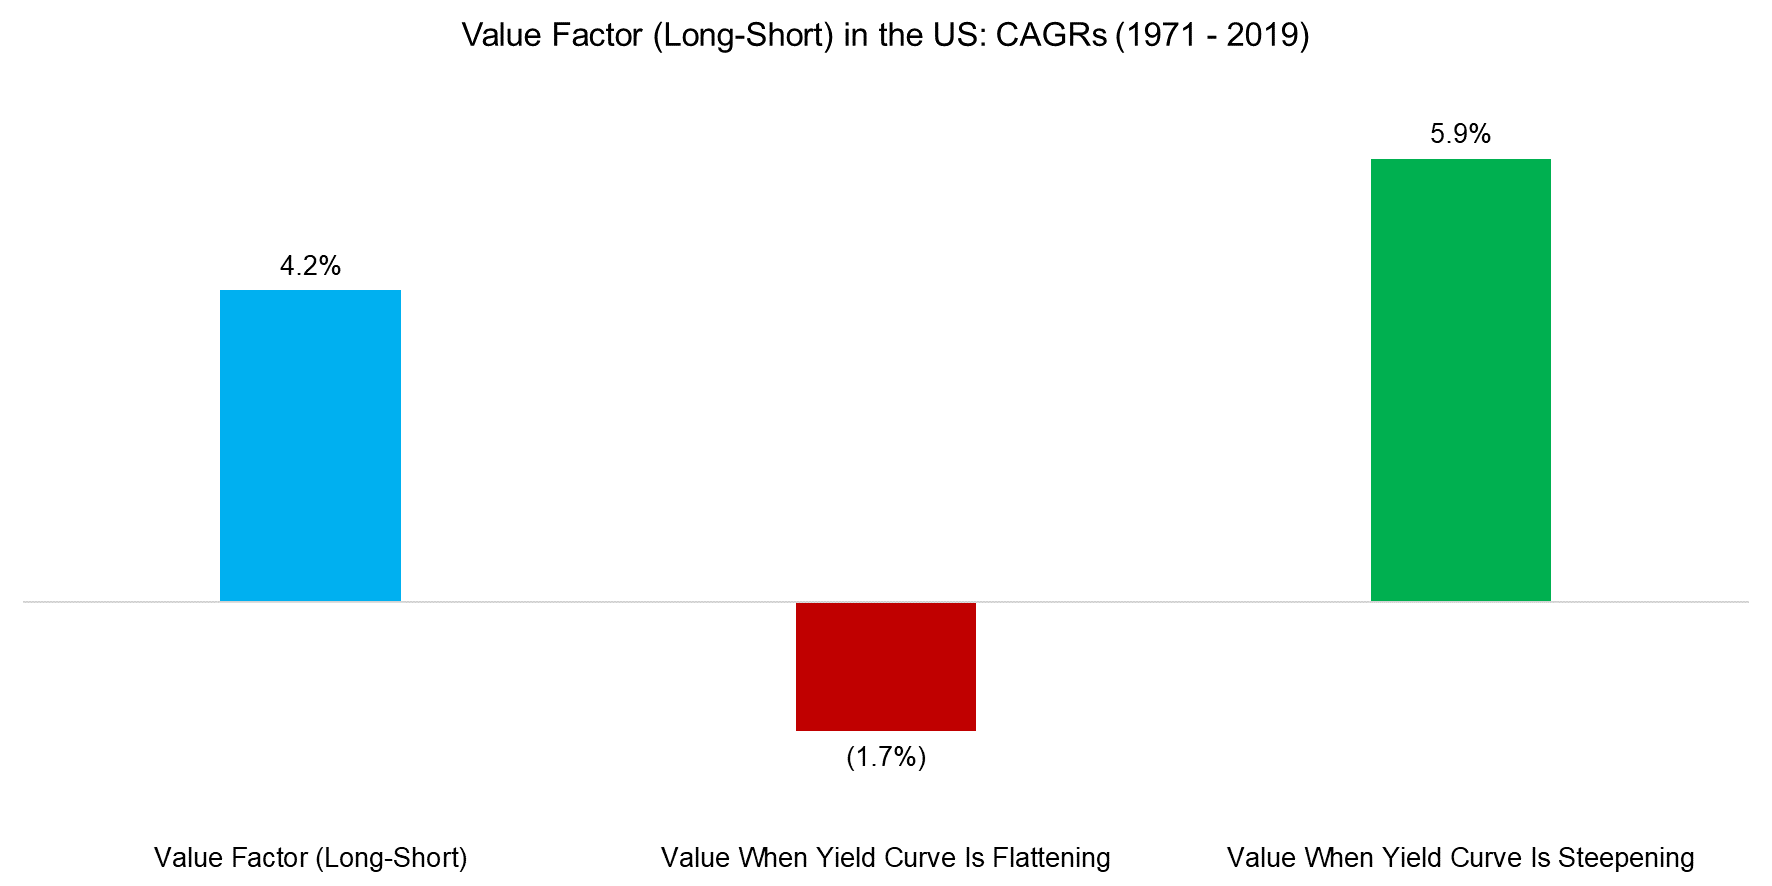 Value Factor (Long-Short) in the US CAGRs (1971 - 2019)